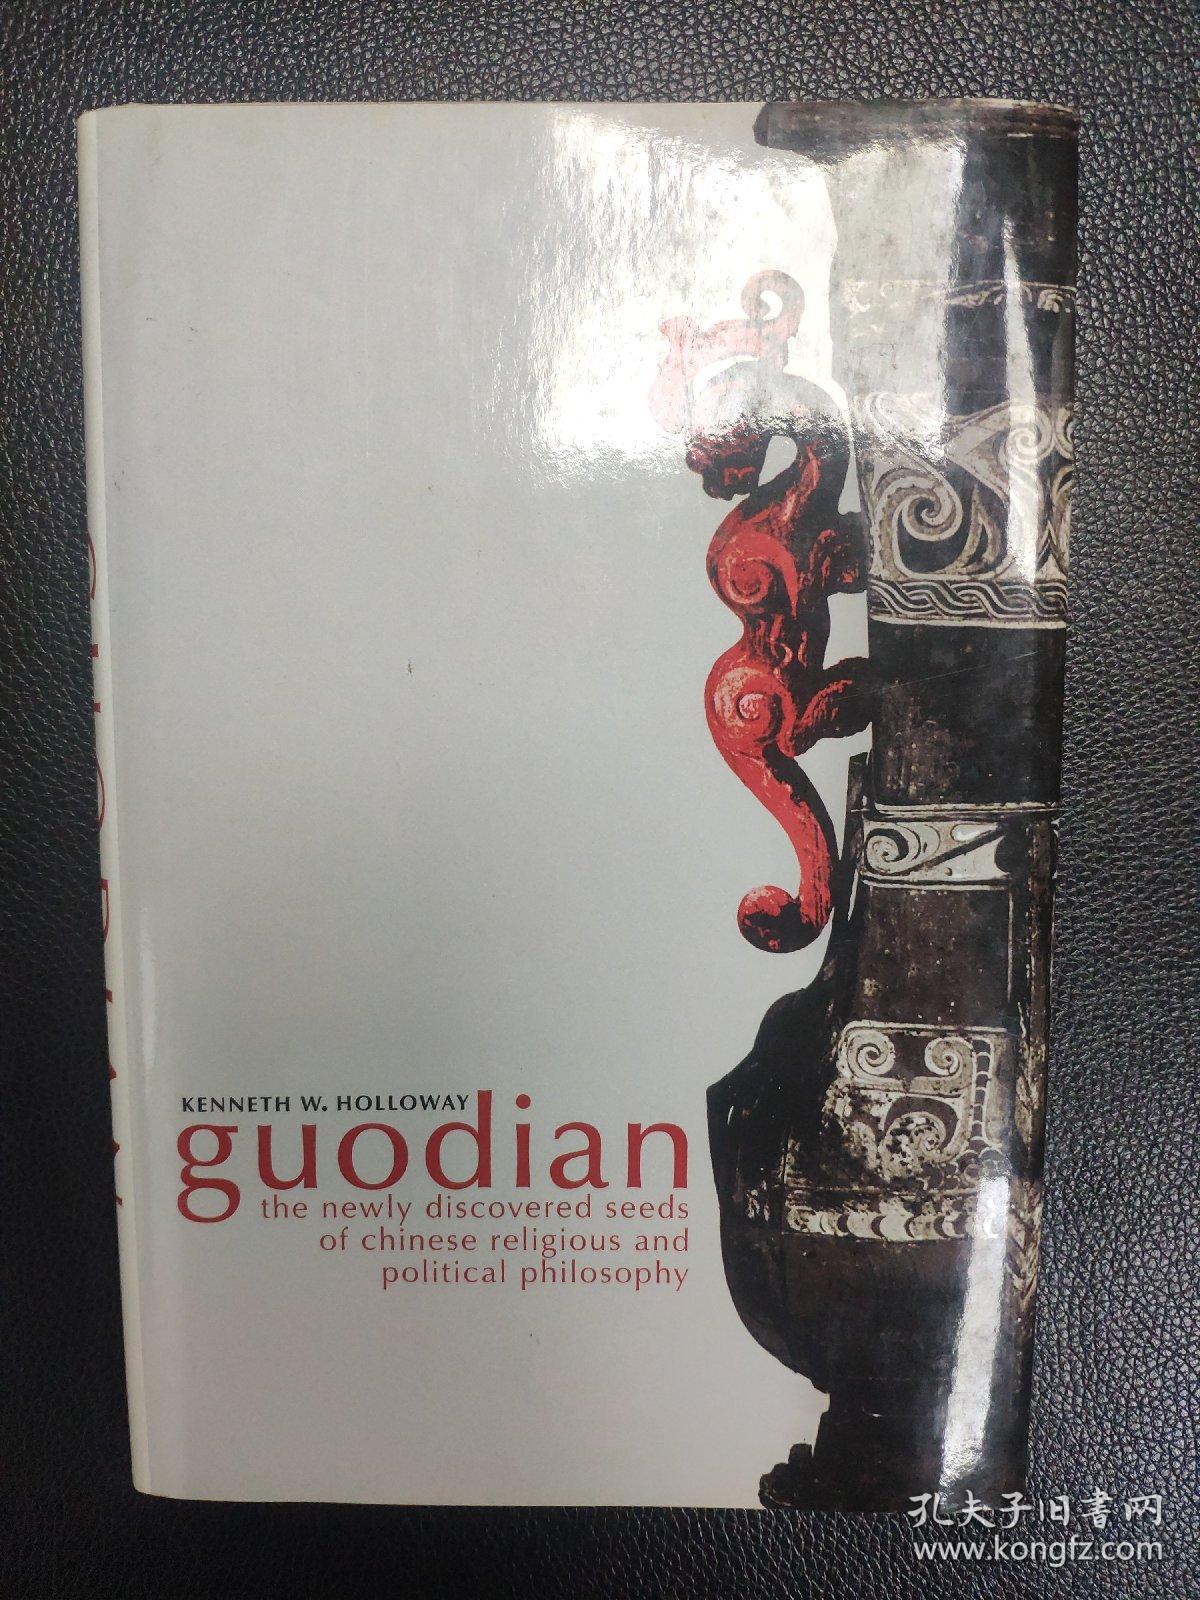 Guodian The Newly Discovered Seeds of Chinese Religious and Political Philosophy (郭店：新发现的中国宗教政治哲学种子）